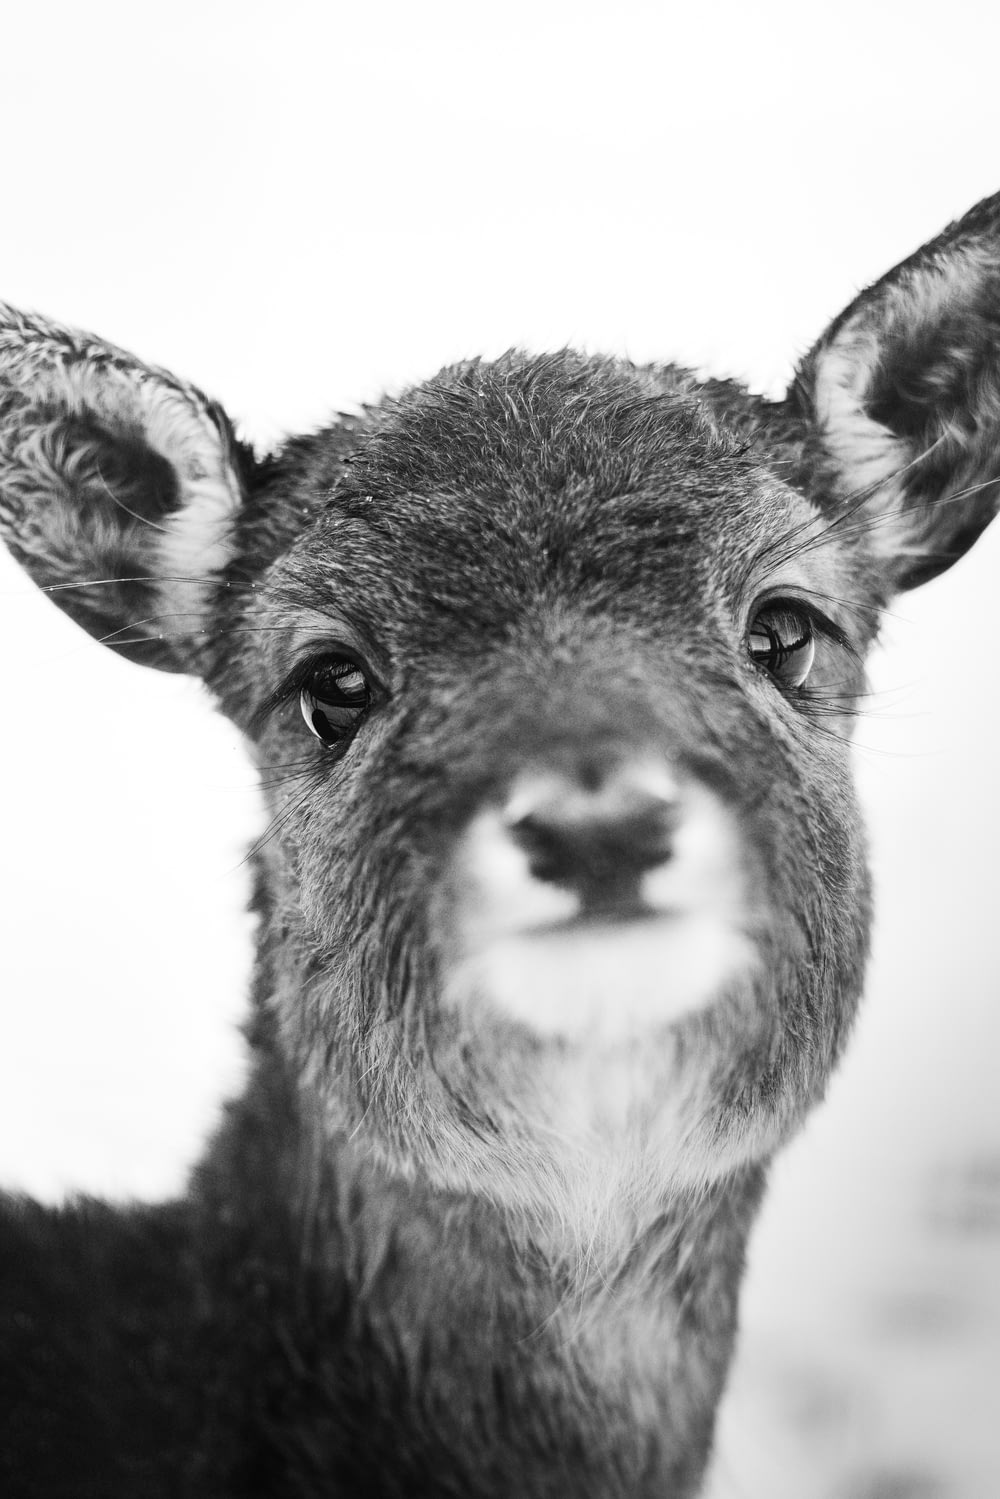 a black and white photo of a baby deer